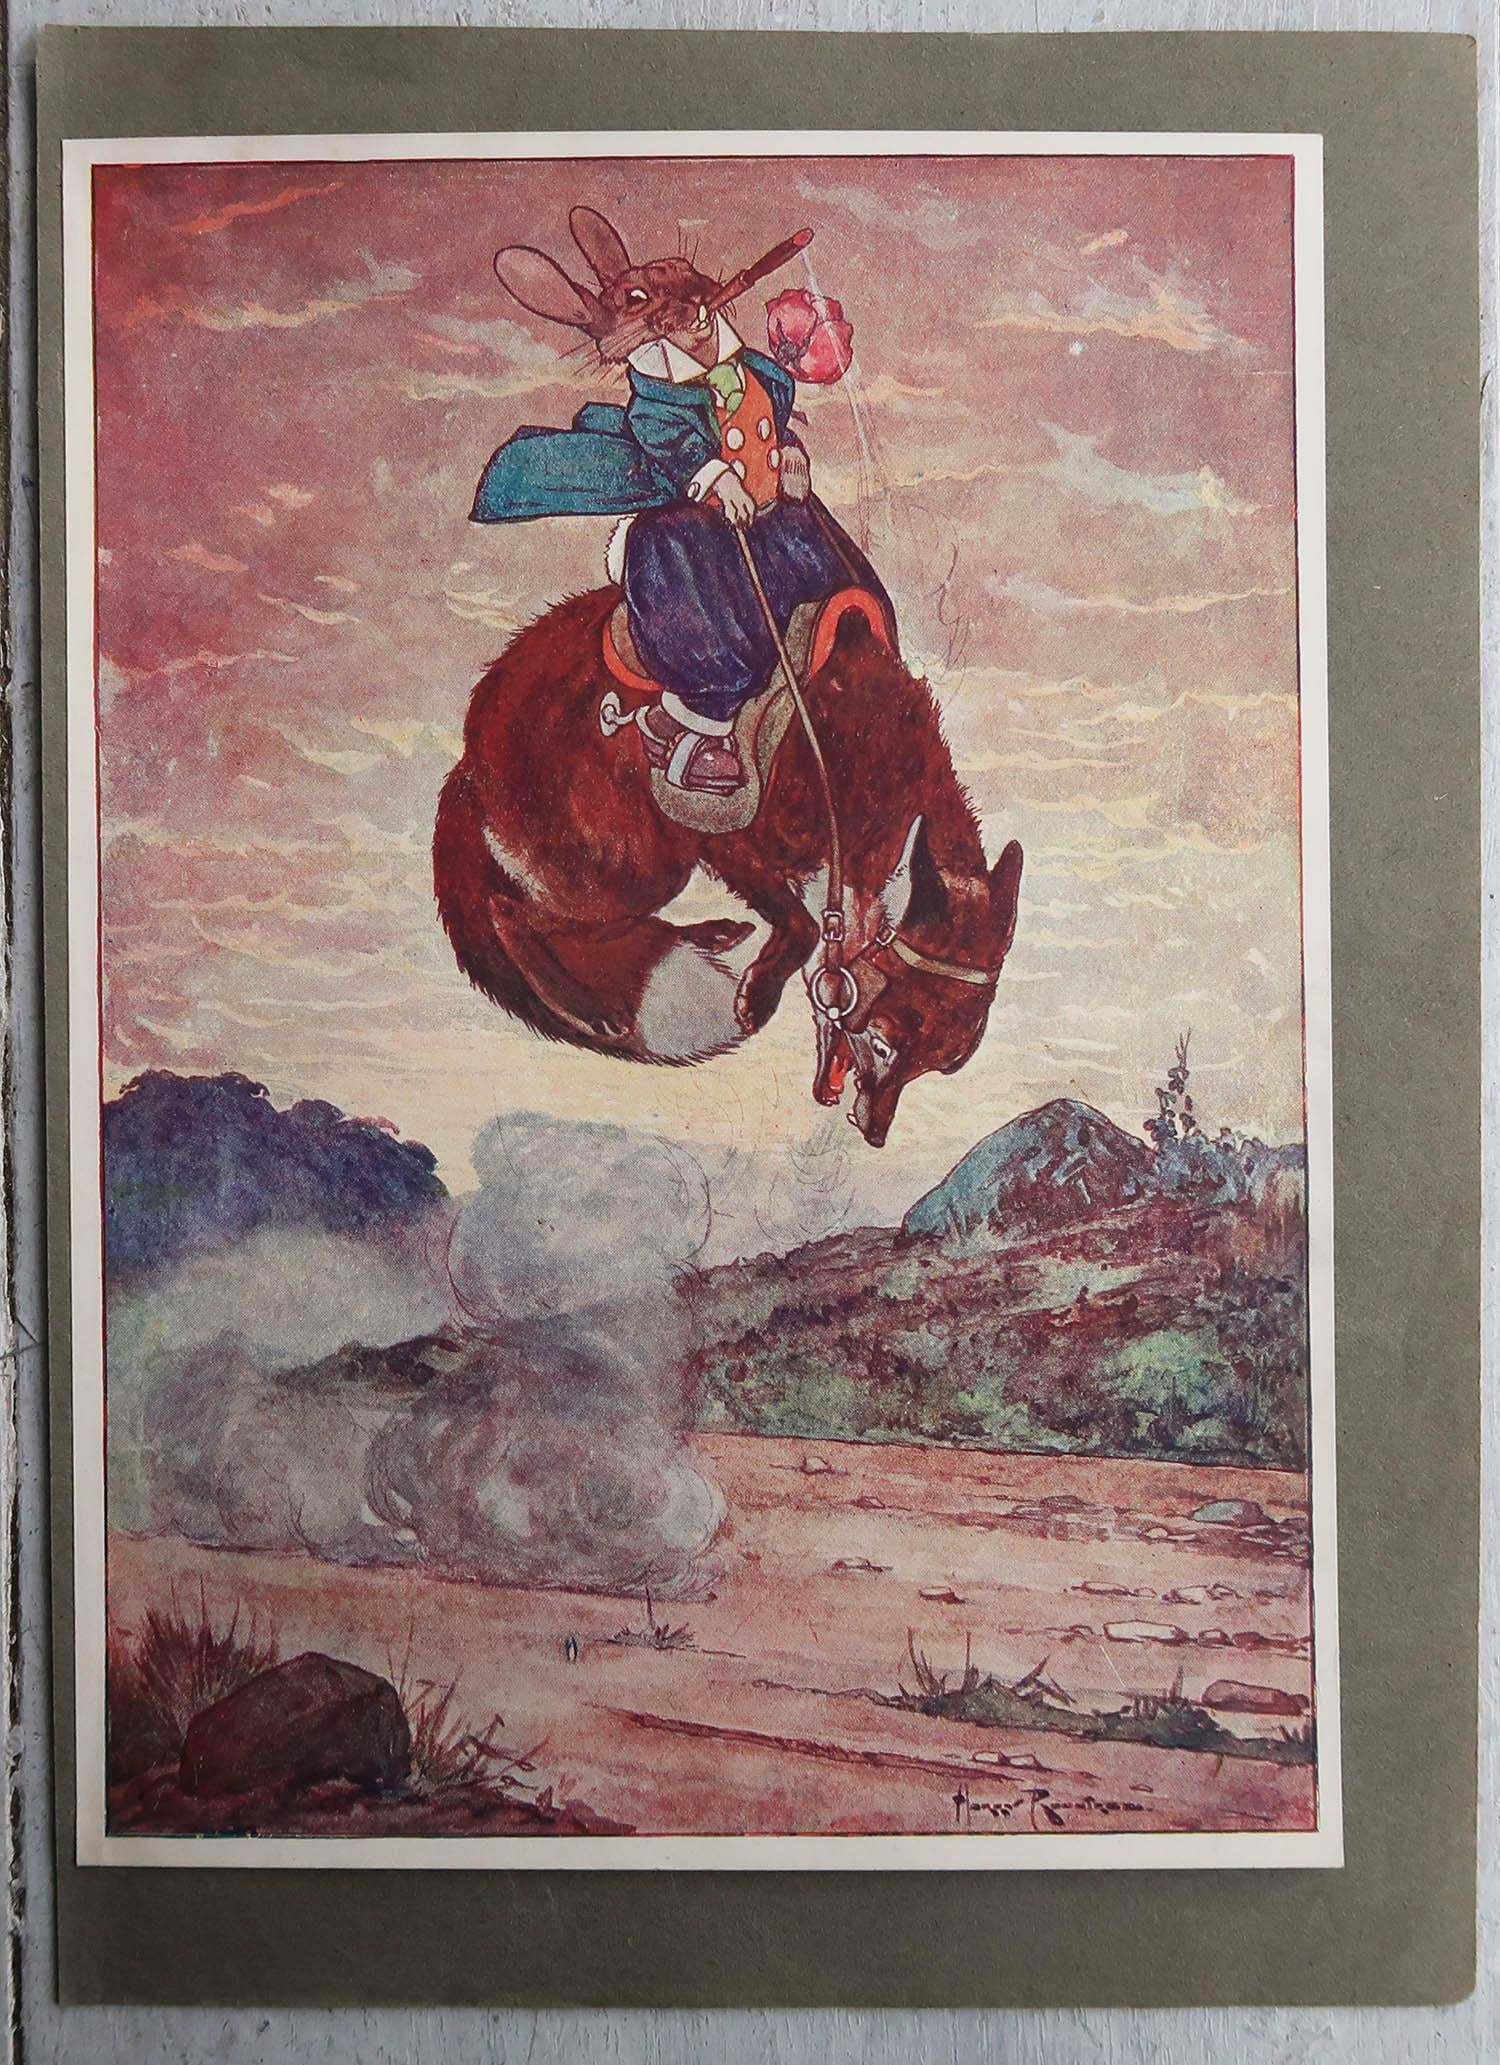 Other Original Vintage Print After Harry Rountree. C.1910